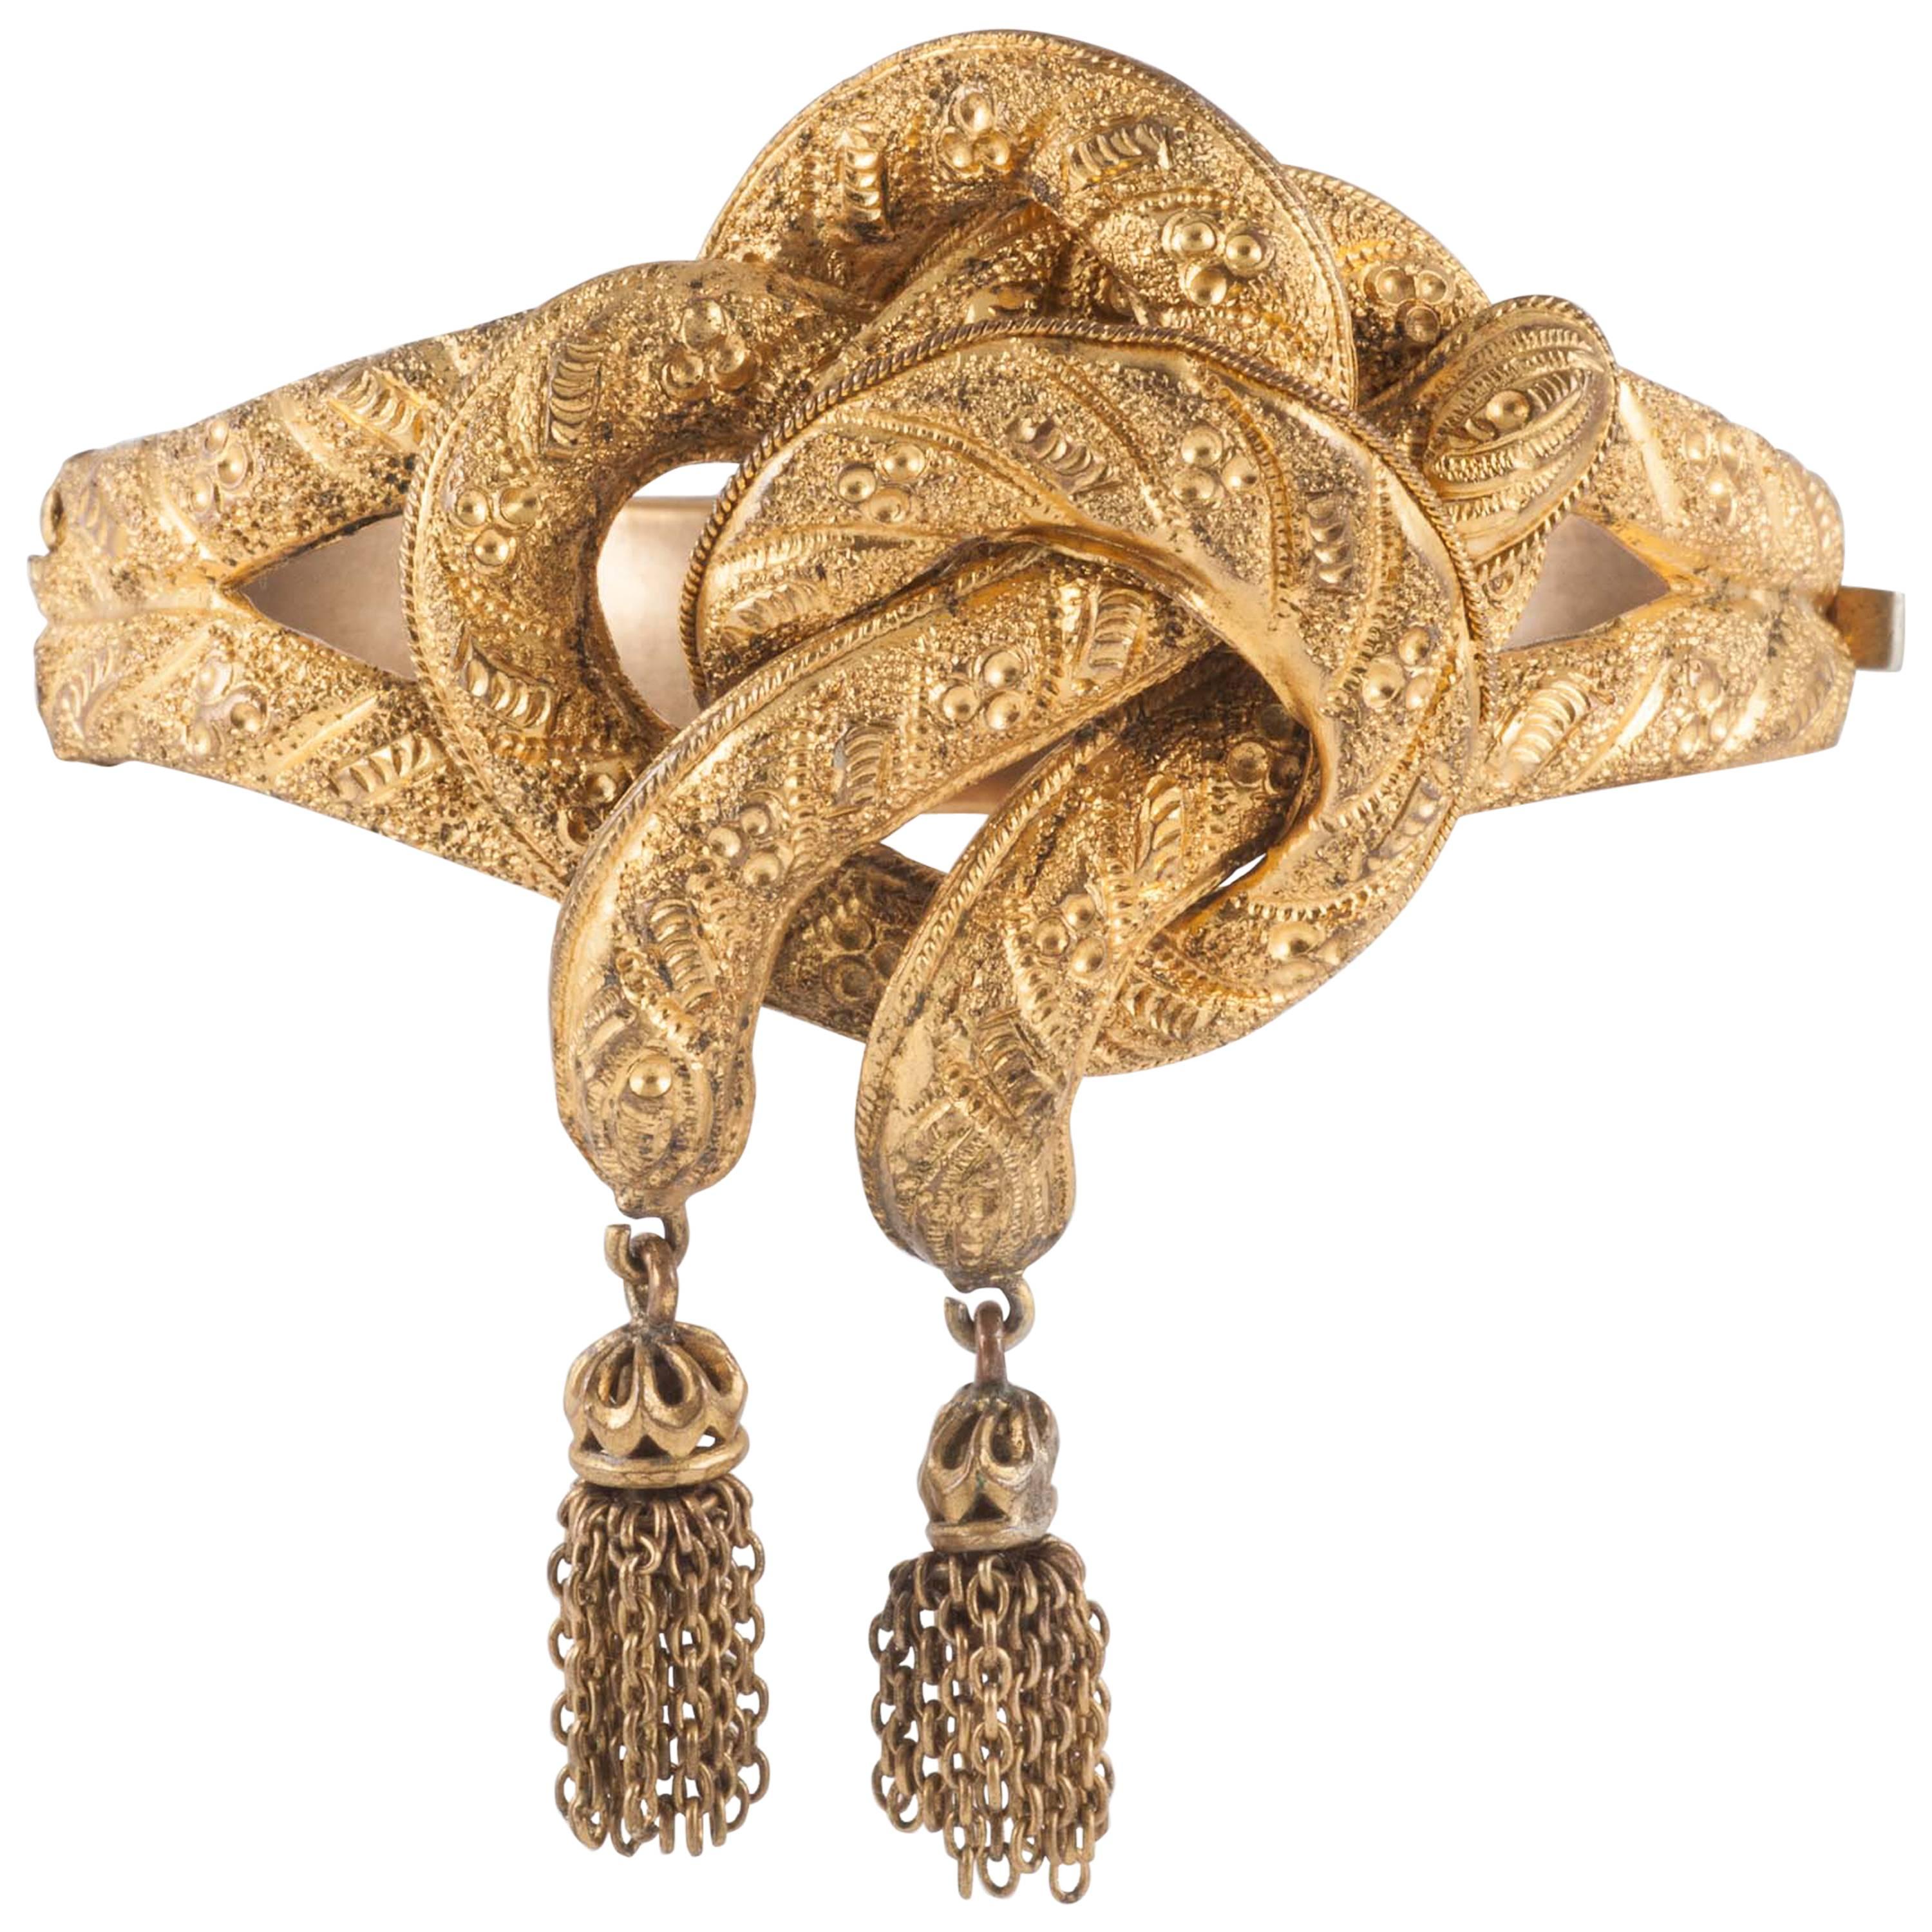 Early Victorian Pinchbeck knotted snake bracelet